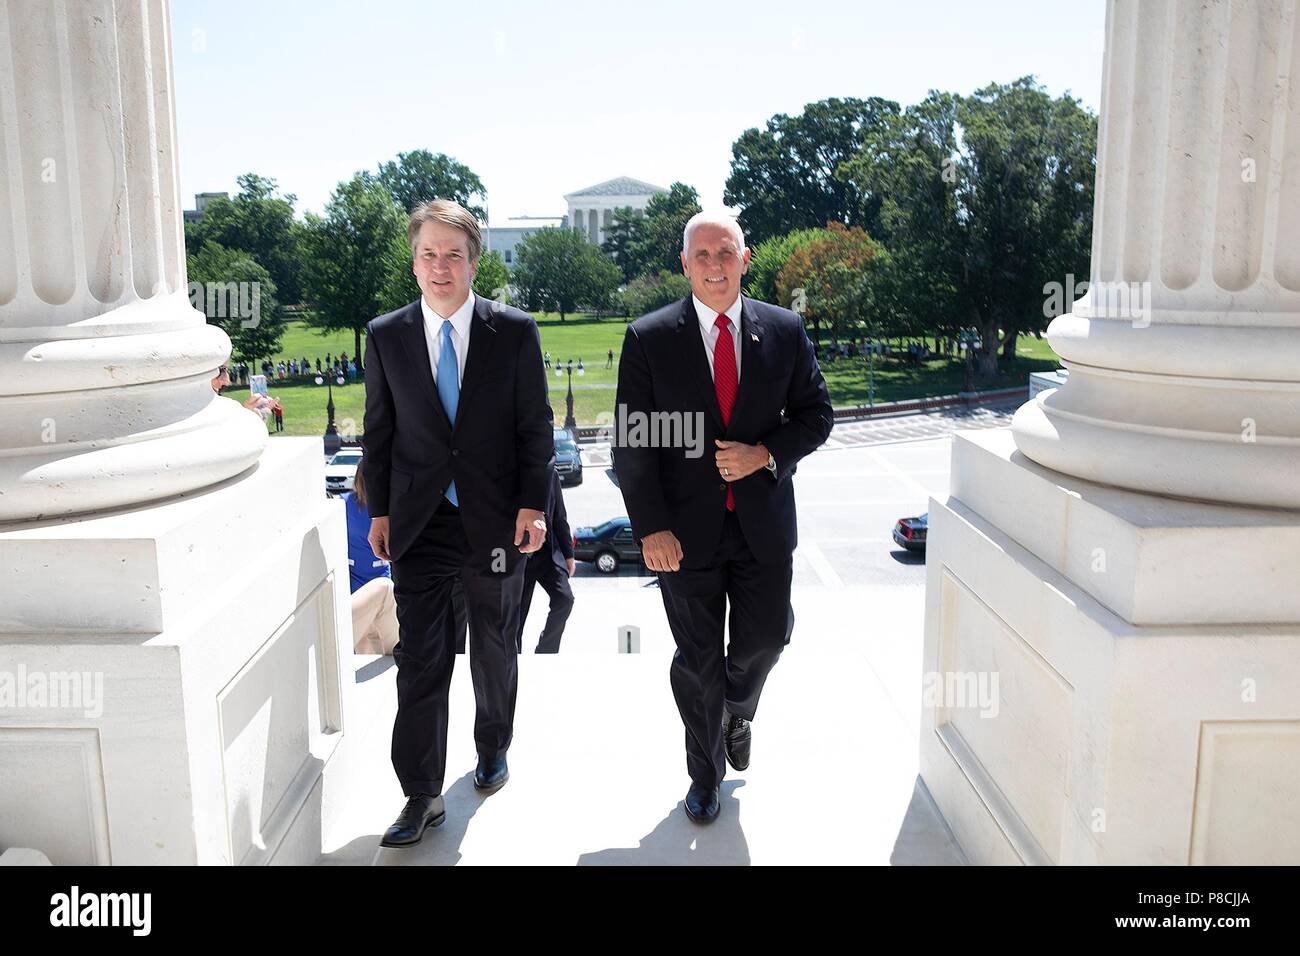 Washington, US. 10th July 2018. Supreme Court nominee Brett Kavanaugh, left, walks with U.S Vice President Mike Pence up the Capitol steps on their way to meet with Senate Majority Leader Mitch McConnell July 10, 2018 in Washington, DC. Credit: Planetpix/Alamy Live News Stock Photo